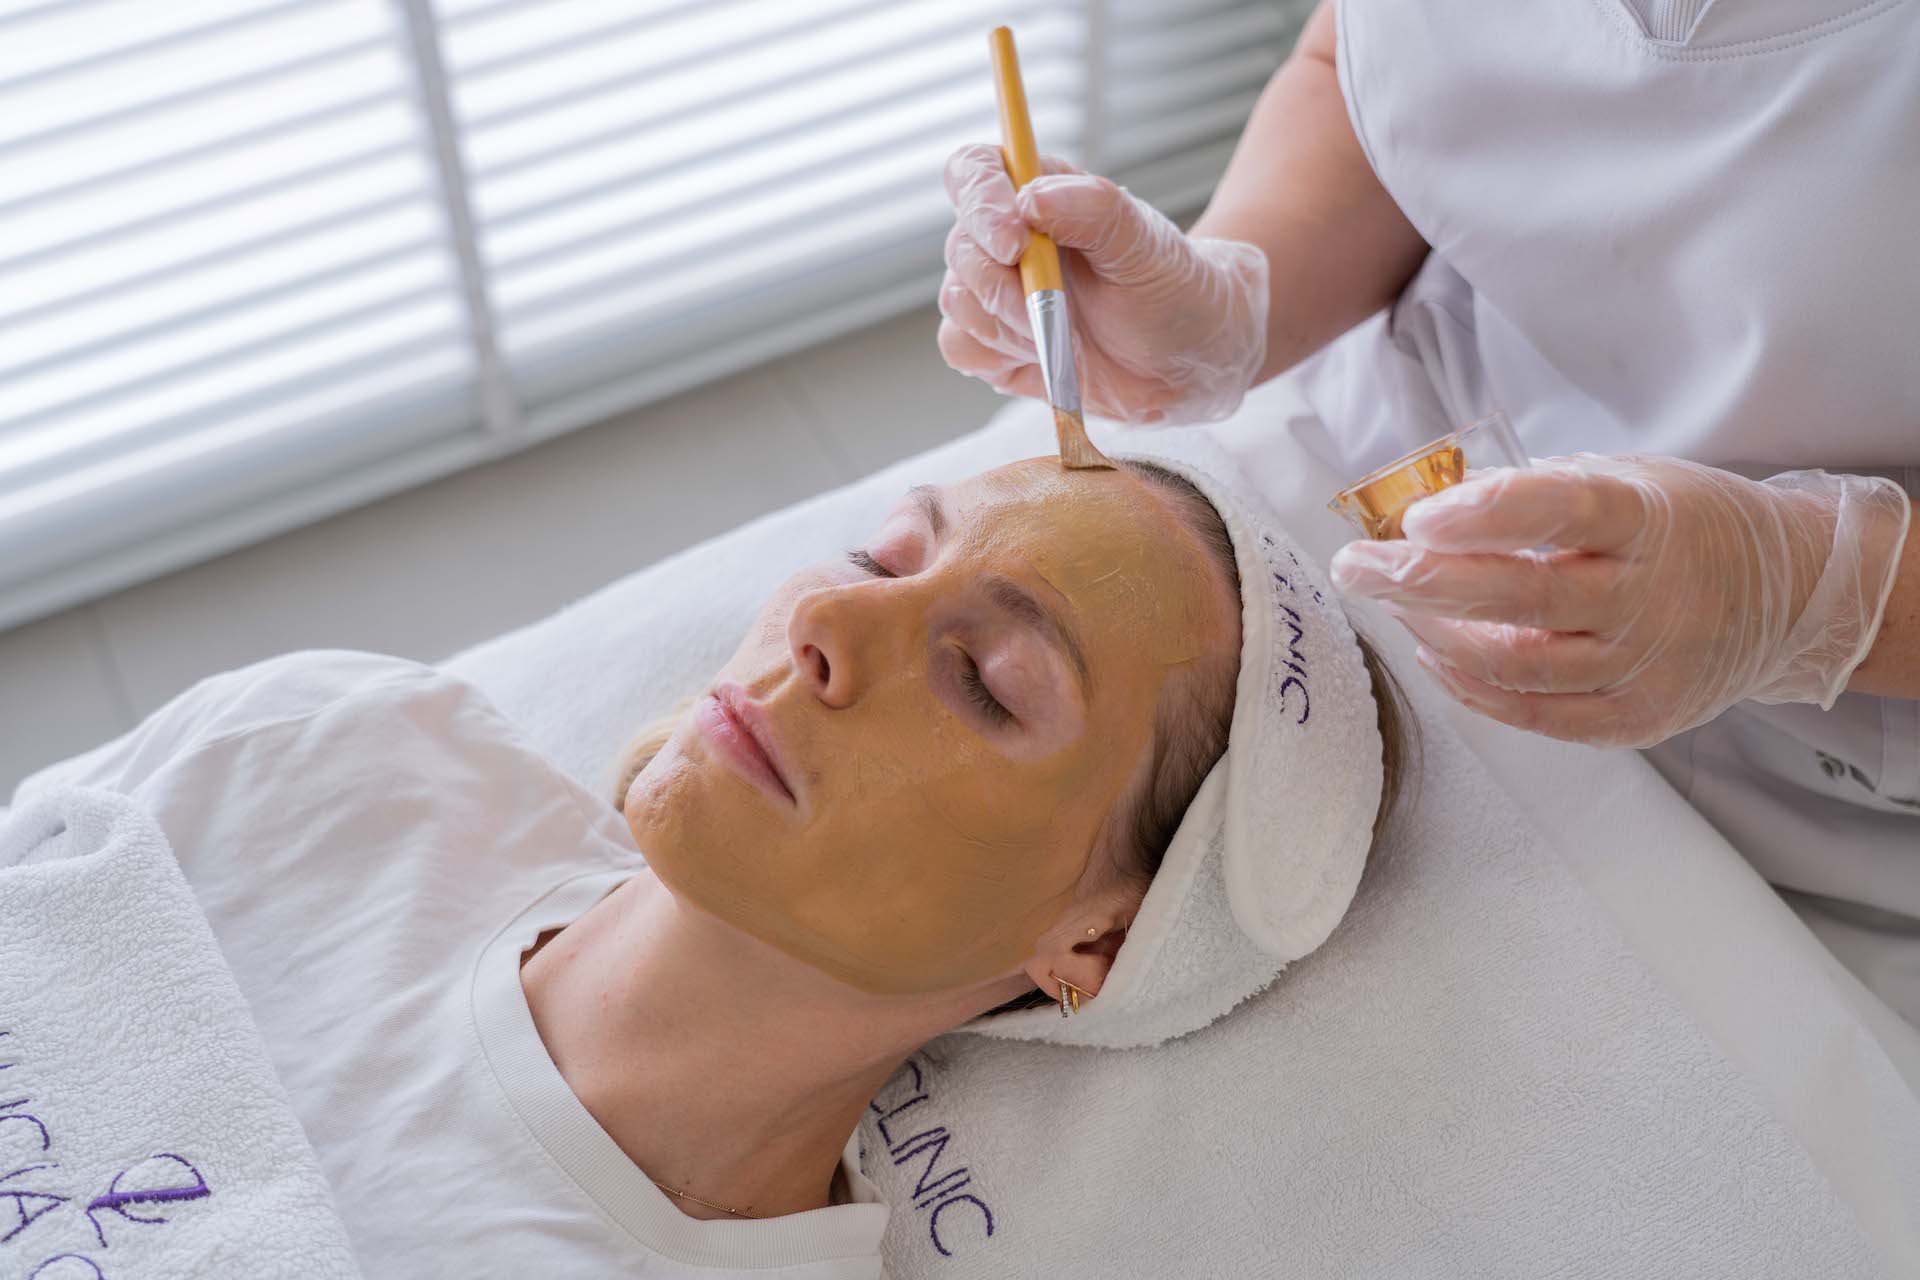 Cosmelan peel, effective skin-lightening facial treatment - reduce hyperpigmentation and improve skin tone in one treatment session with this unique procedure.